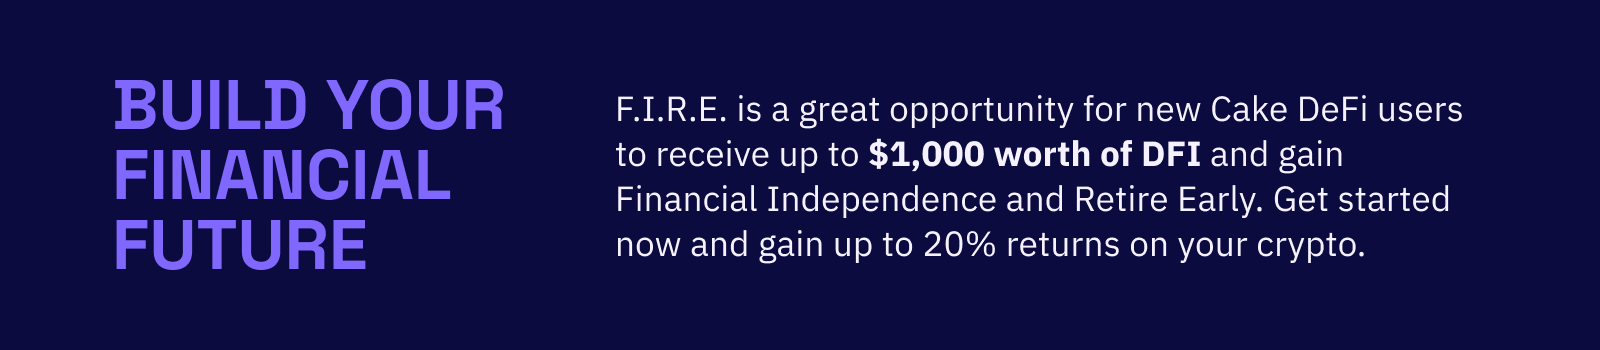 Gain Financial Independence and Retire Early (F.I.R.E.)  with Cake DeFi